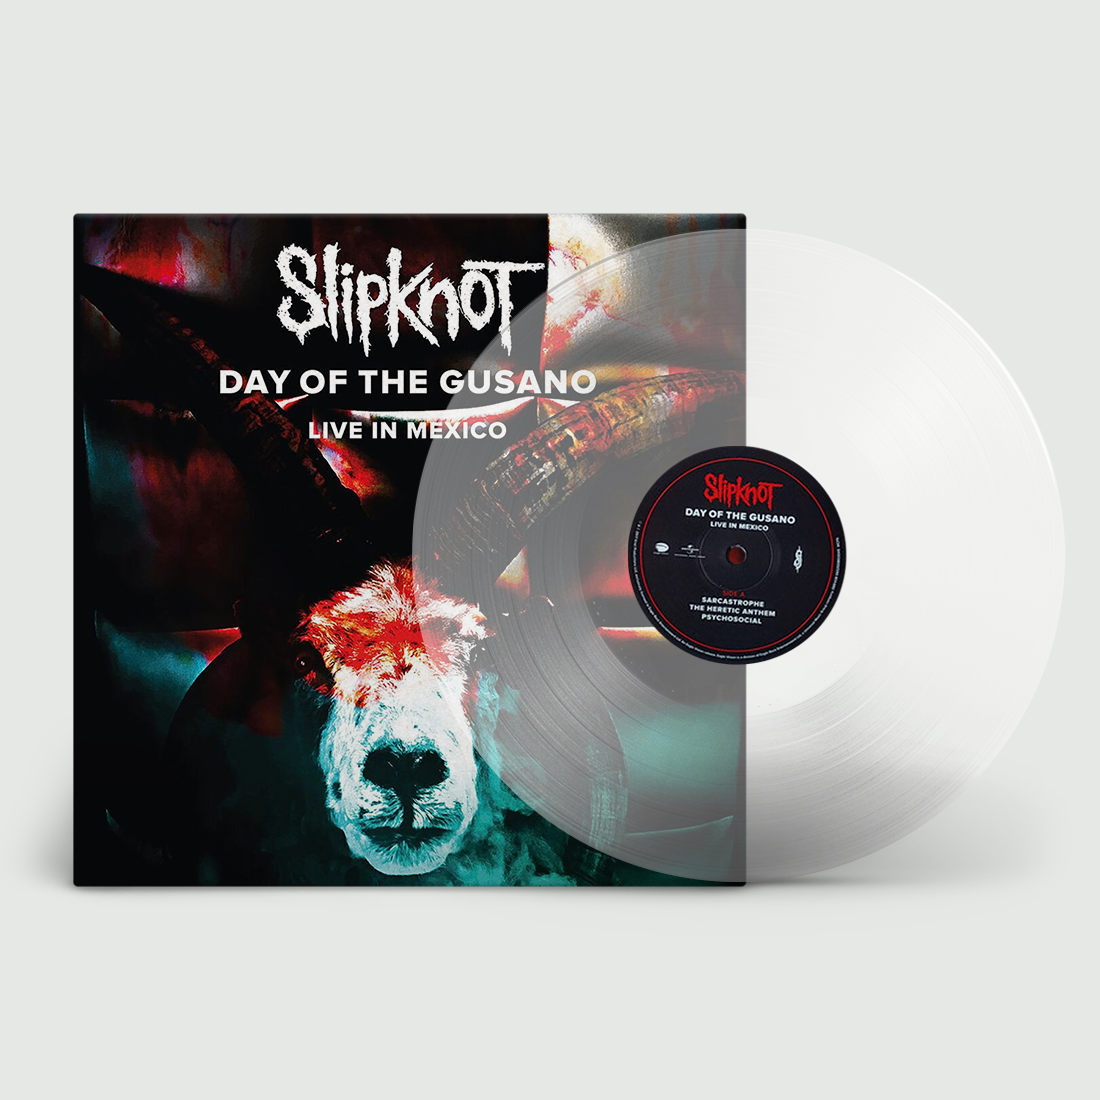 Slipknot - Day Of The Gusano (Live In Mexico): Limited Transparent Vinyl LP + DVD